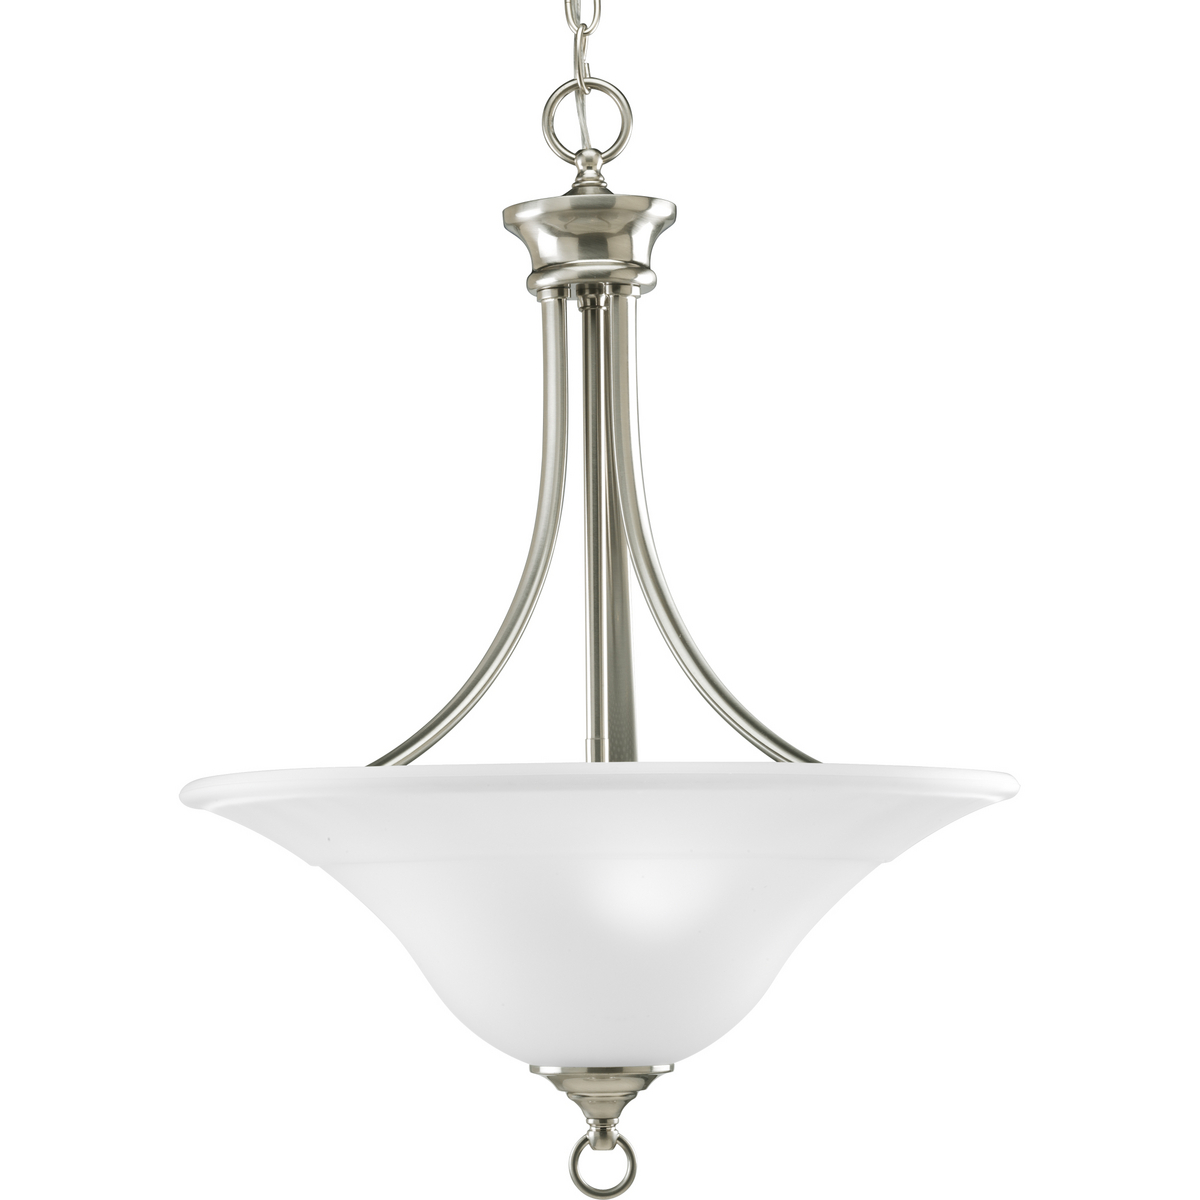 Three-light hall and foyer fixture featuring soft angles, curving lines and etched glass shades. Gracefully exotic, the Trinity Collection offers classic sophistication for transitional interiors. Sculptural forms of metal and glass are enhanced by a classic finish. This transitional style can transform a room or your whole home with its charming versatility. Brushed Nickel finish.